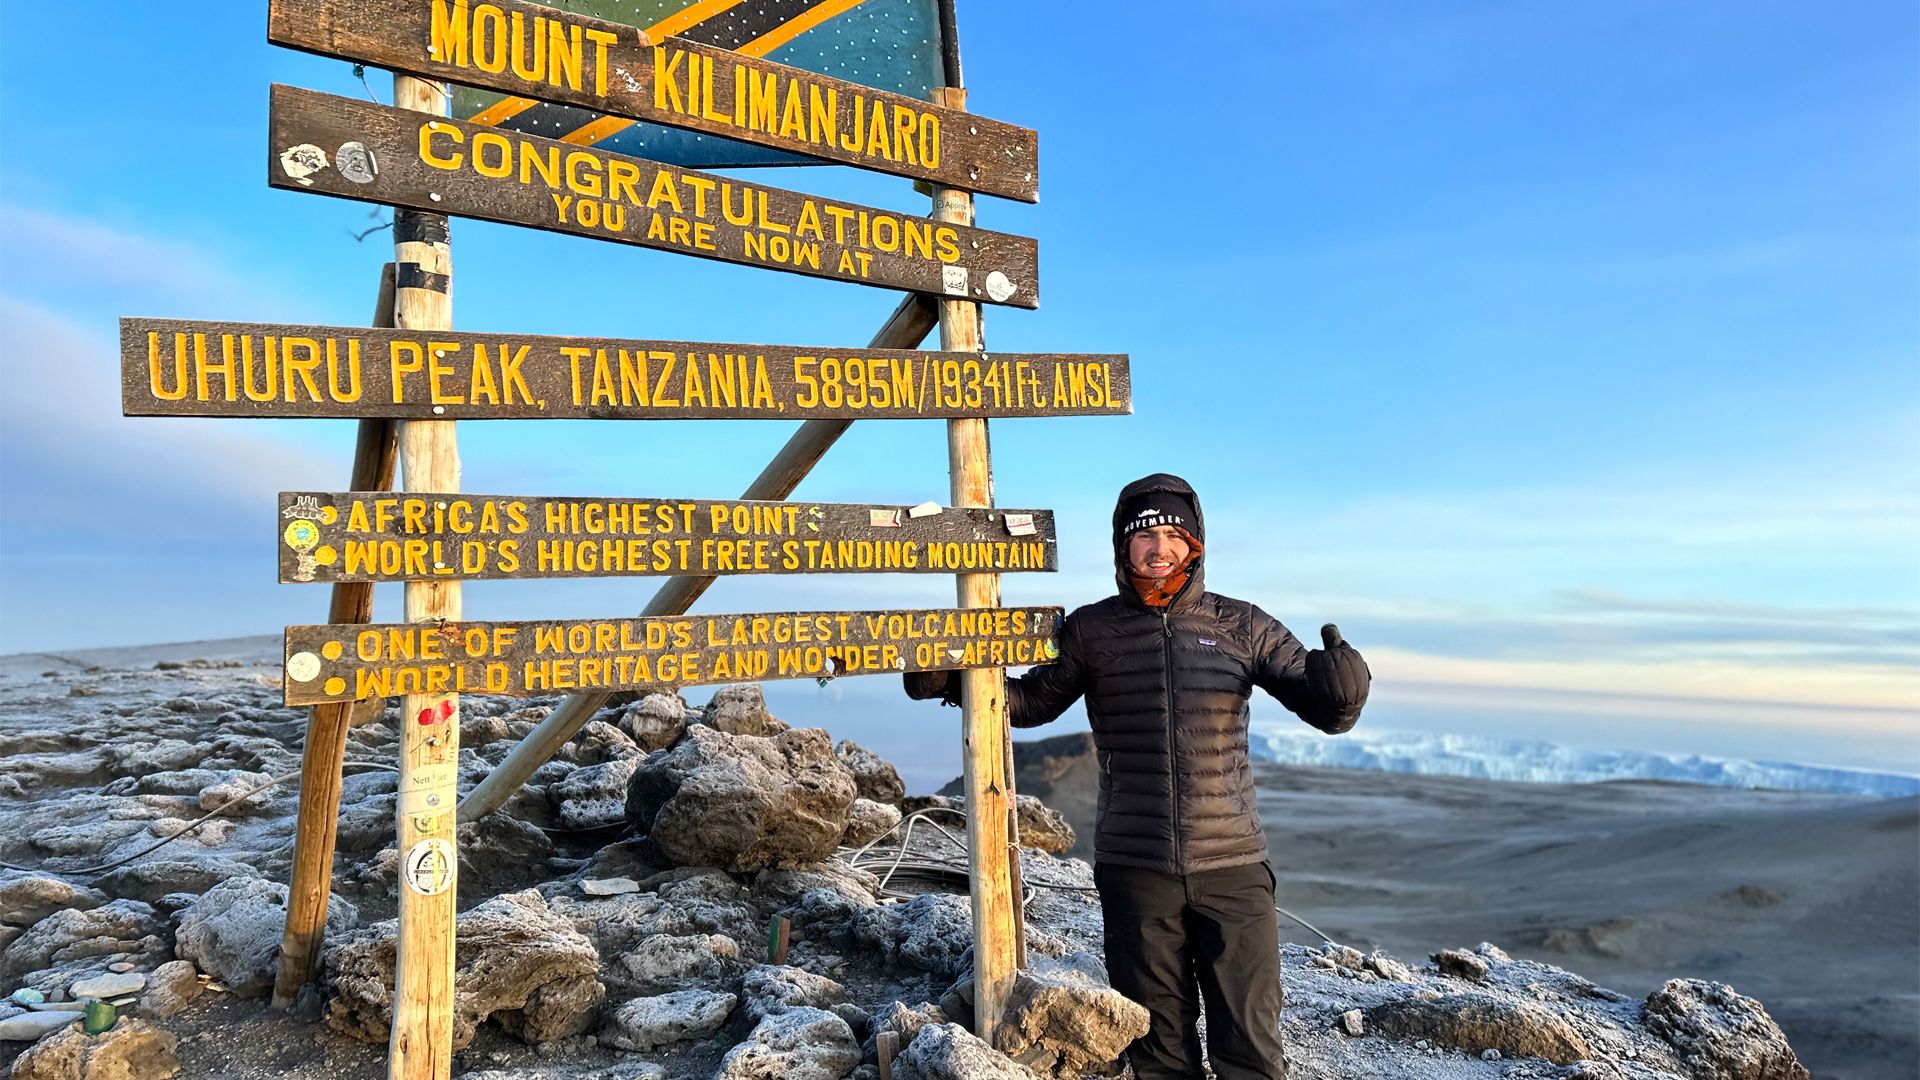 A bundled up young Mo Bro poses at the summit of Mount Kilimanjaro, with an epic vista behind him. The sign reads "Congratulations you are now at Uhuru Peak"